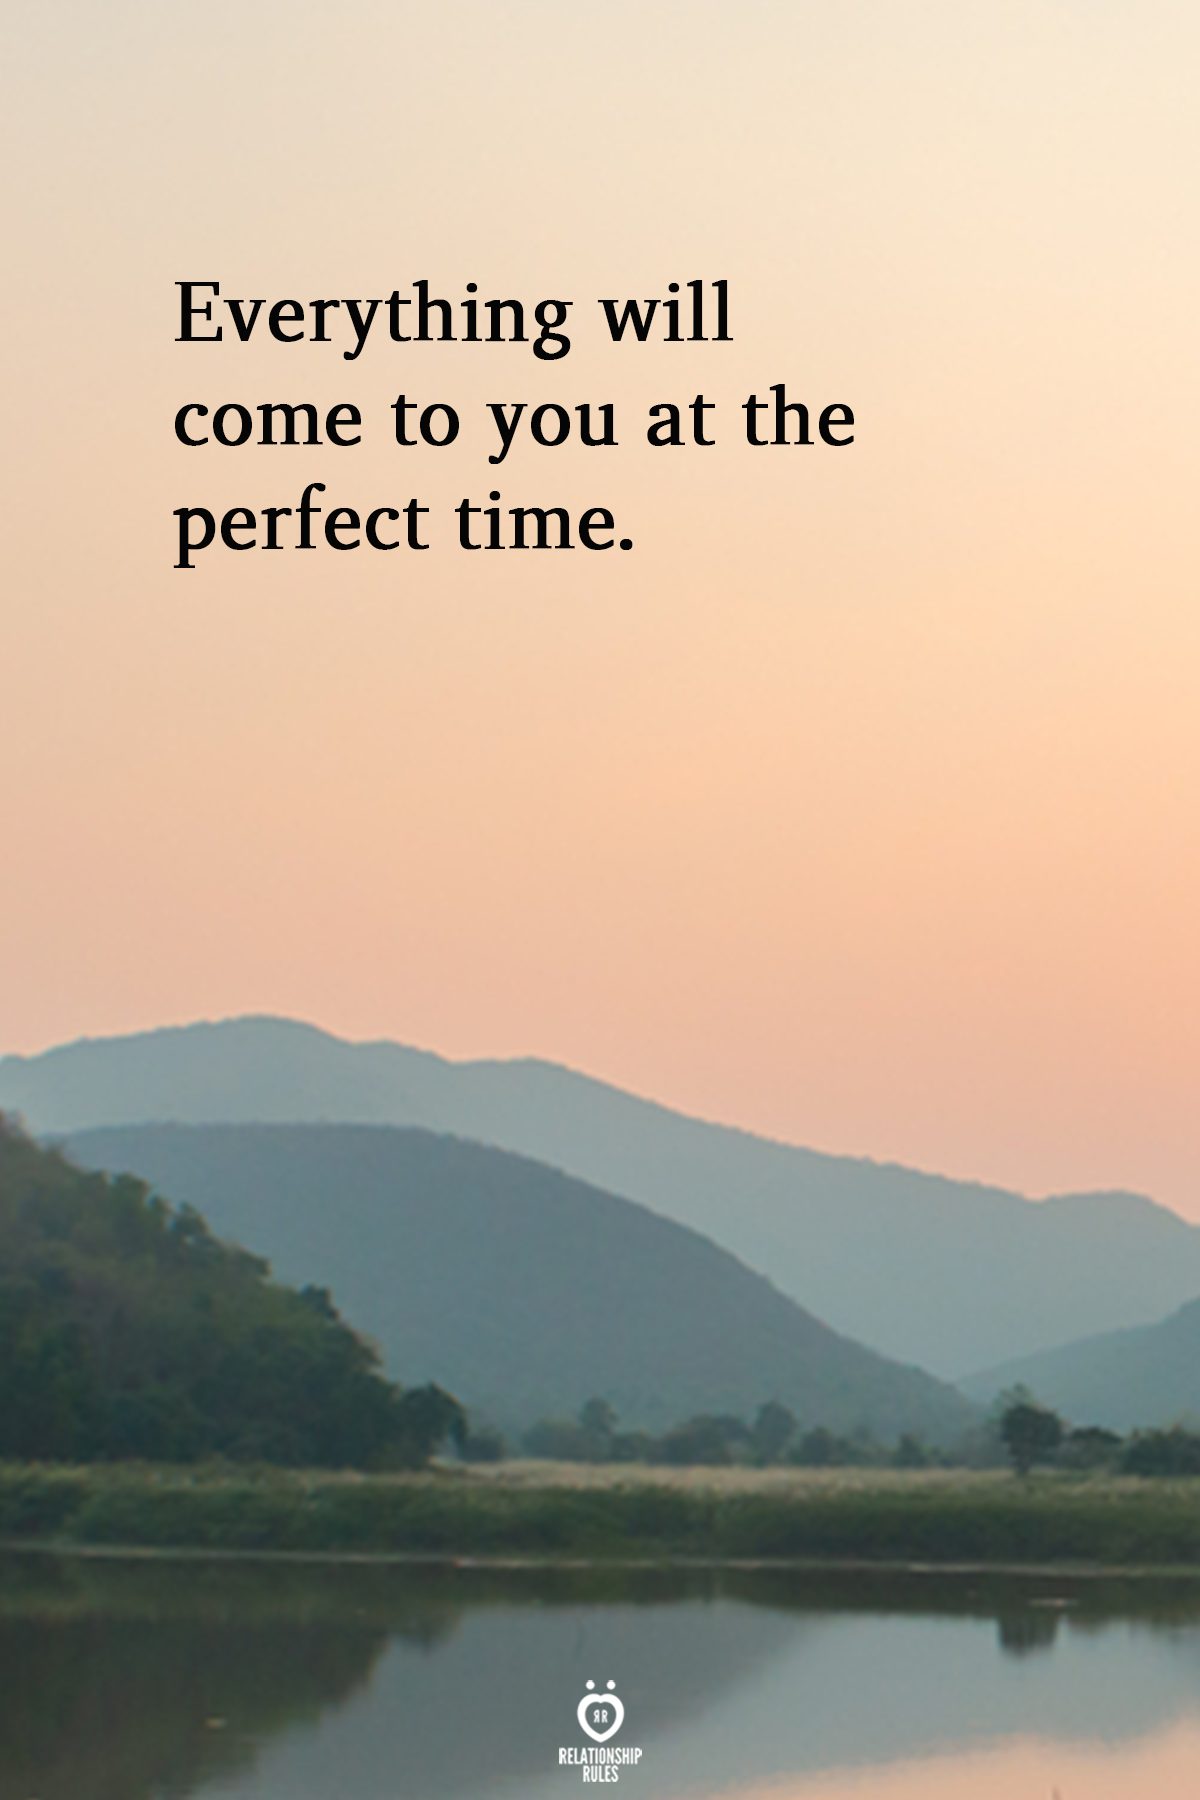 51 Best Perfect Timing Quotes